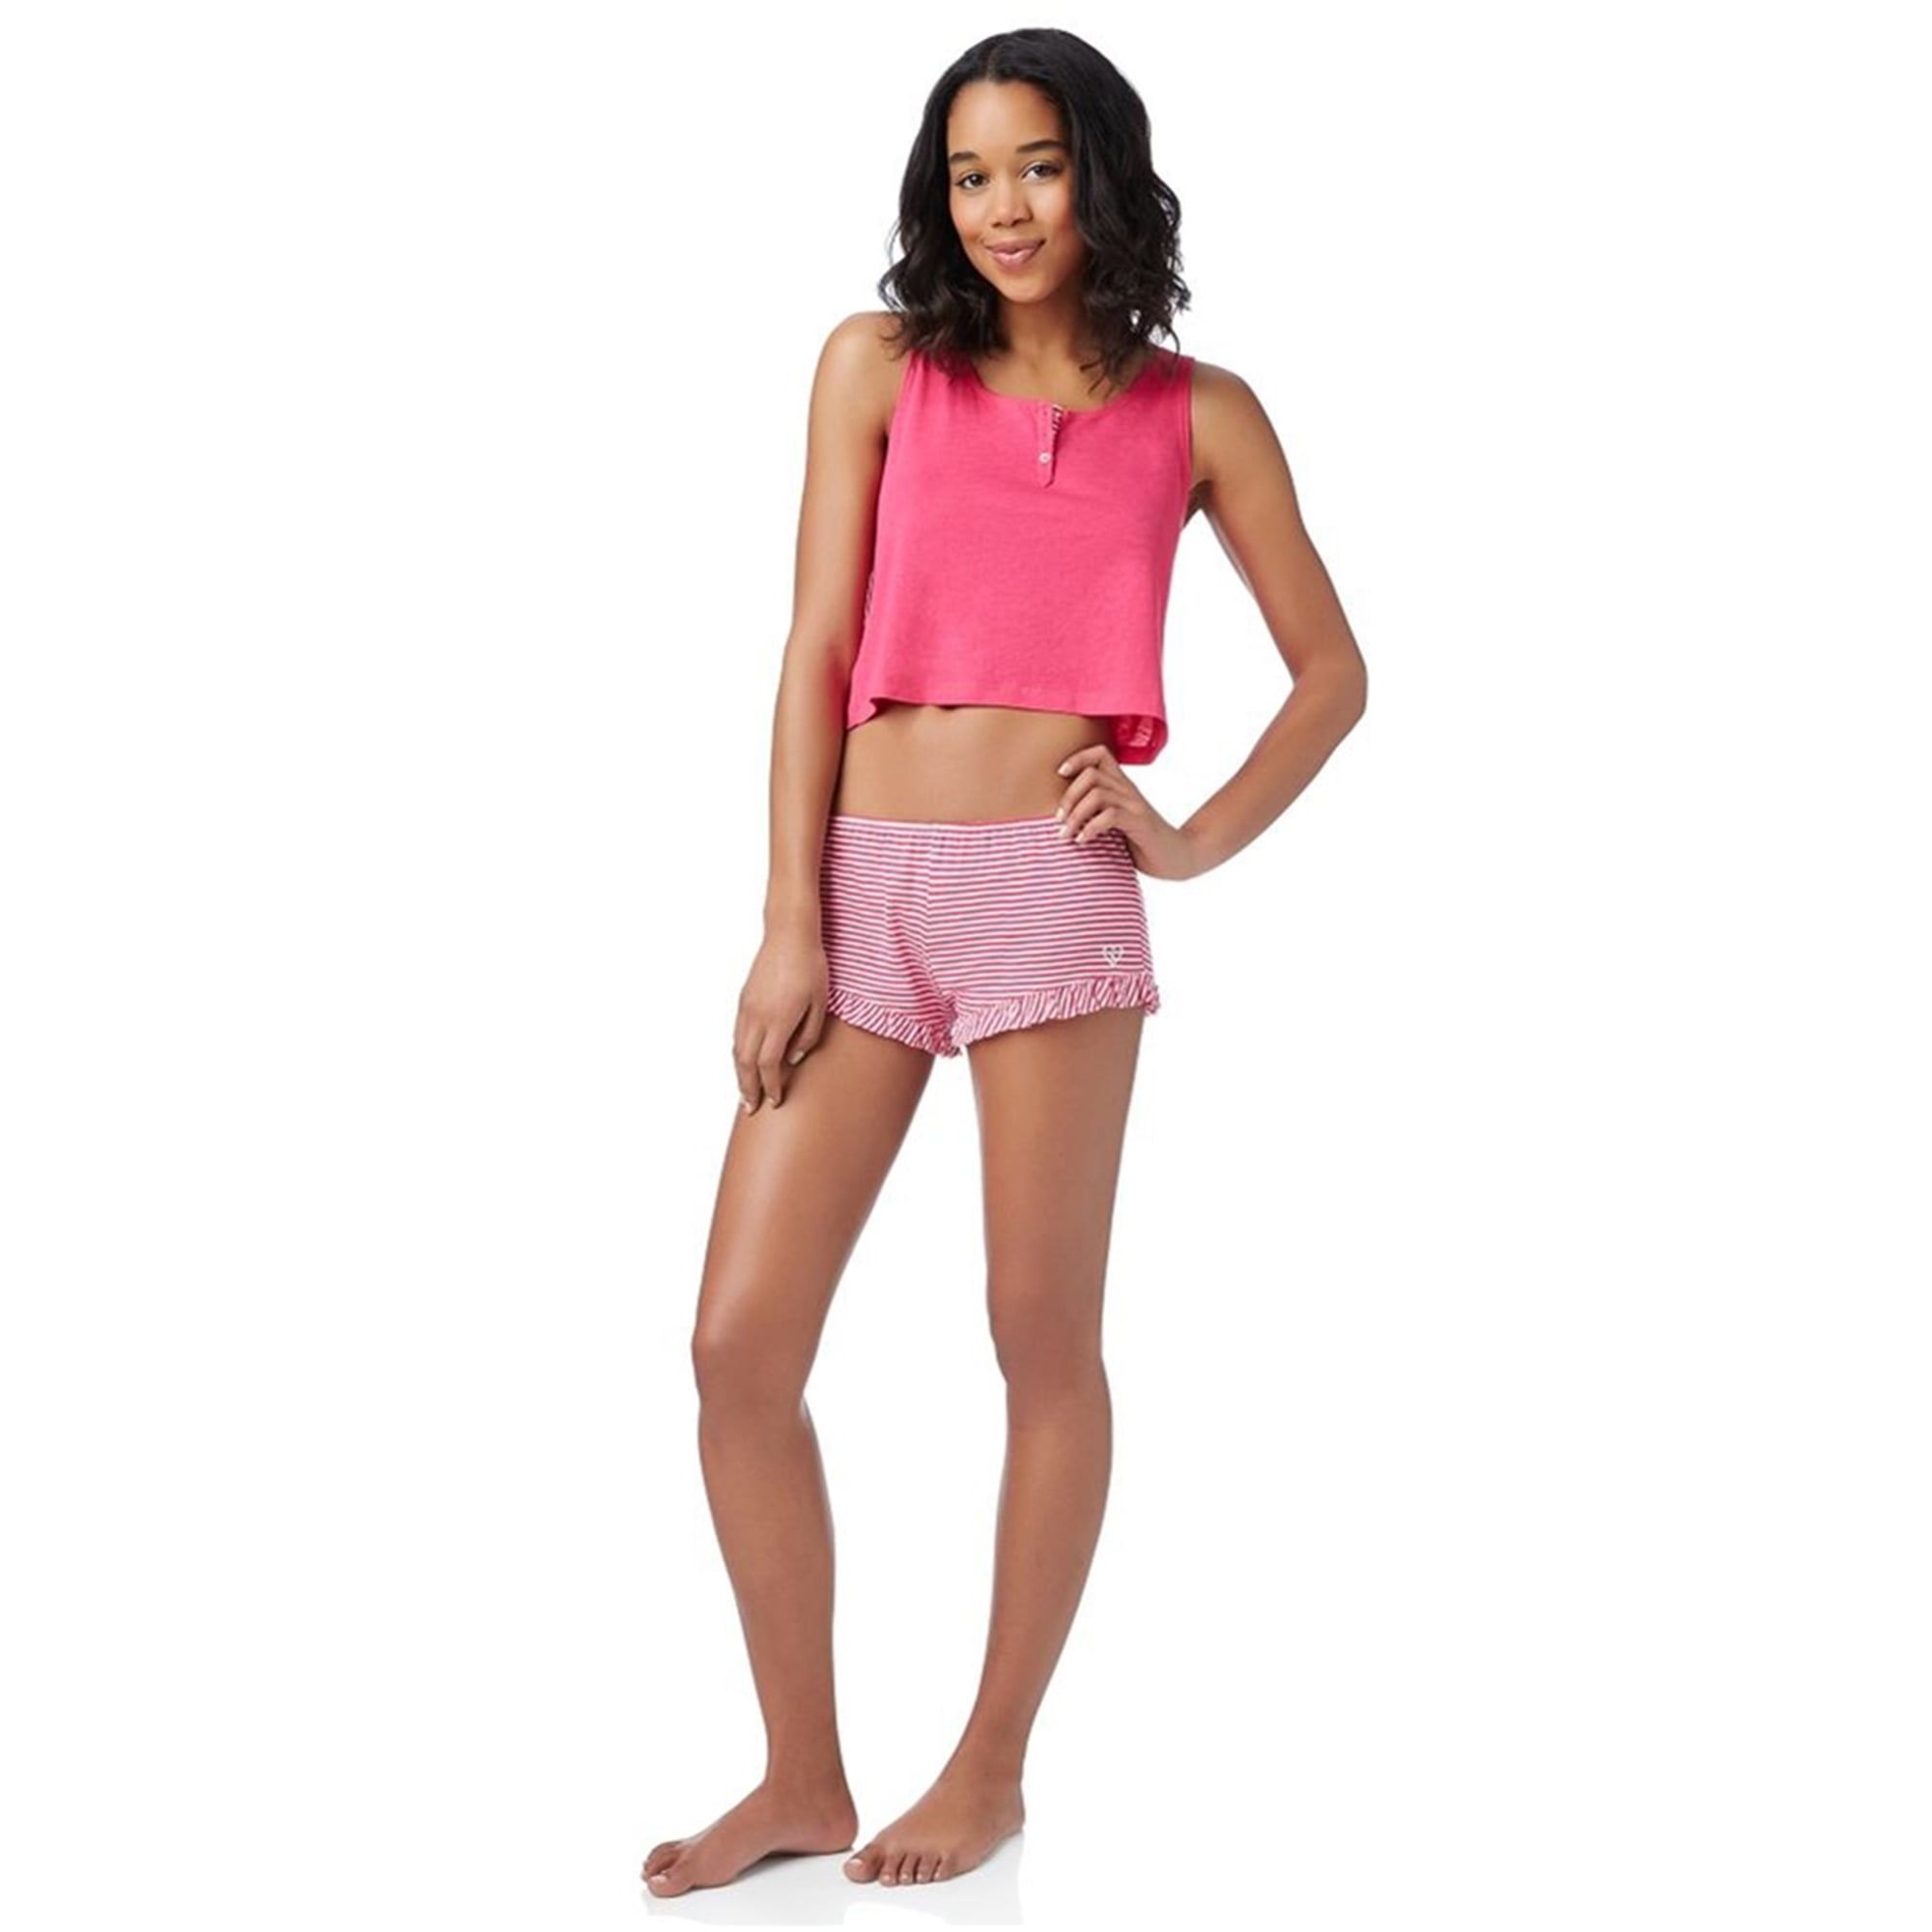 Aeropostale, Tops, For 25 Hot Pink Tank